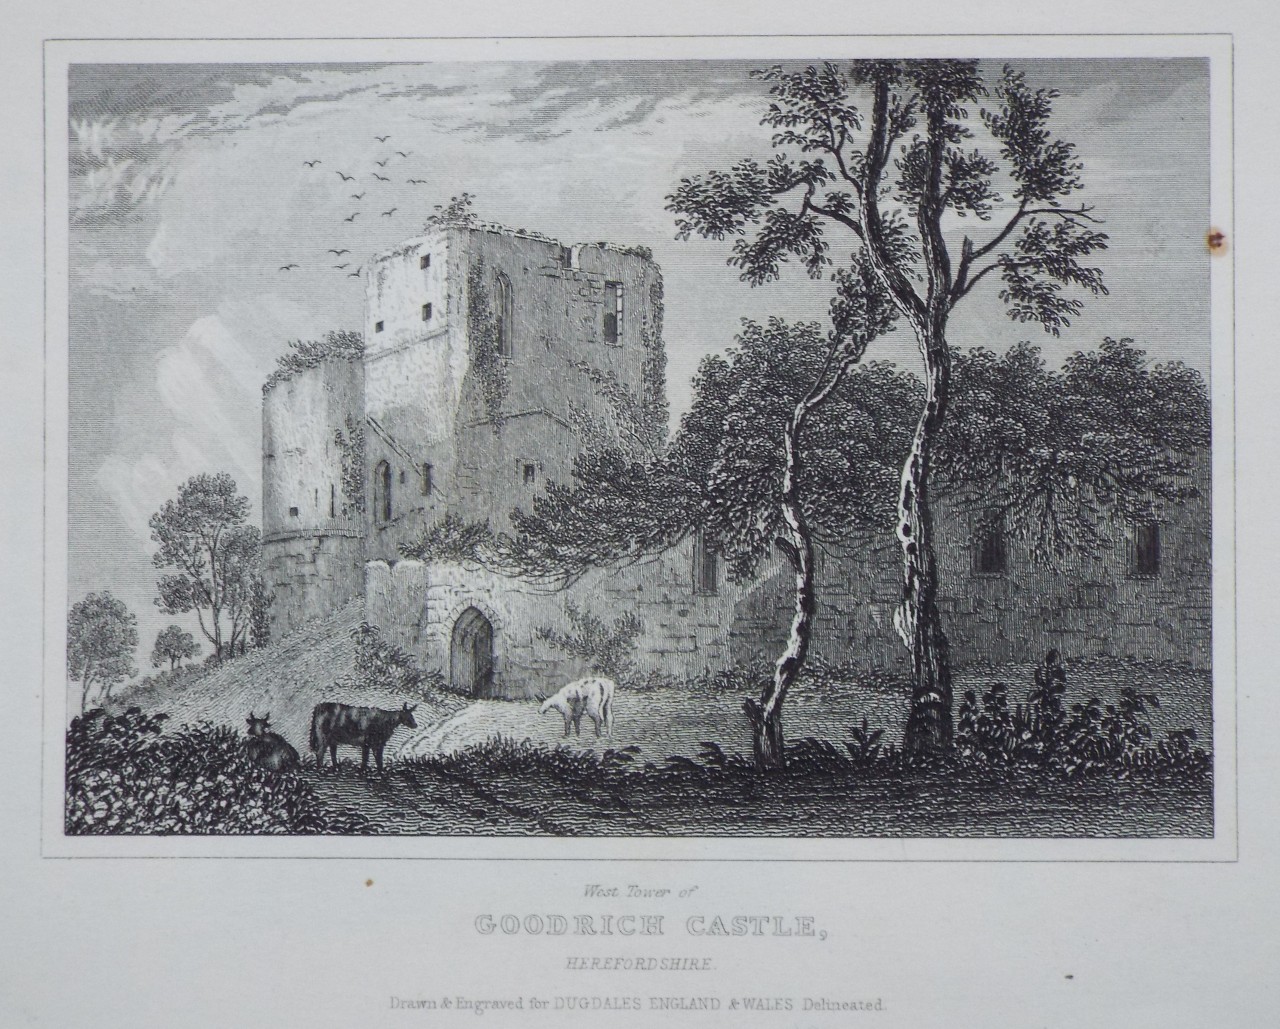 Print - West Tower of Goodrich Castle, Herefordshire.